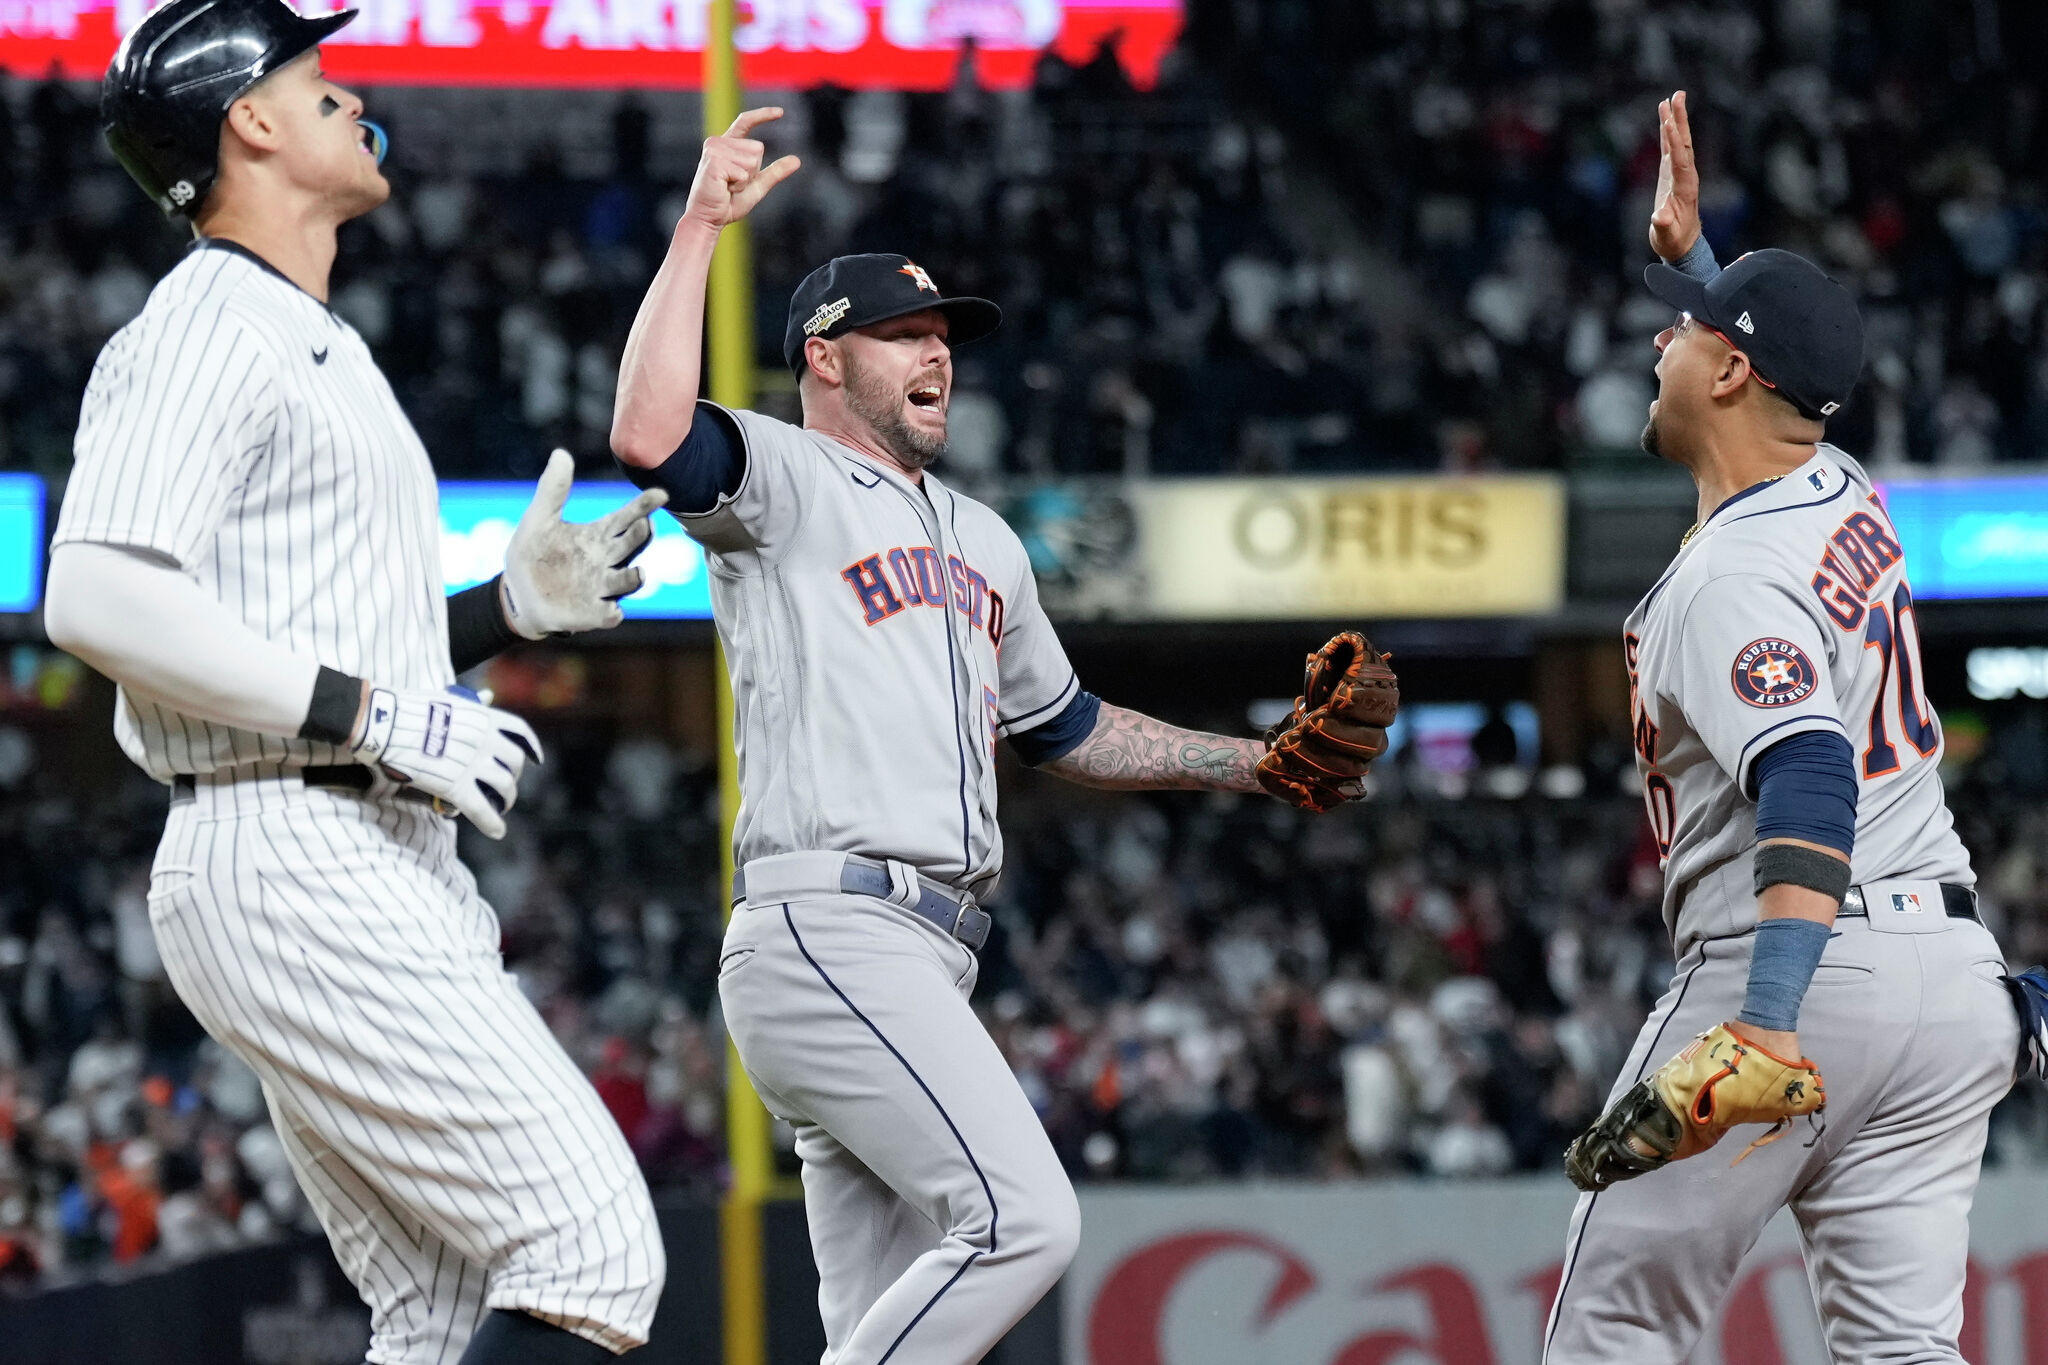 How To The Watch NY Yankees vs. Houston Astros On Prime Video